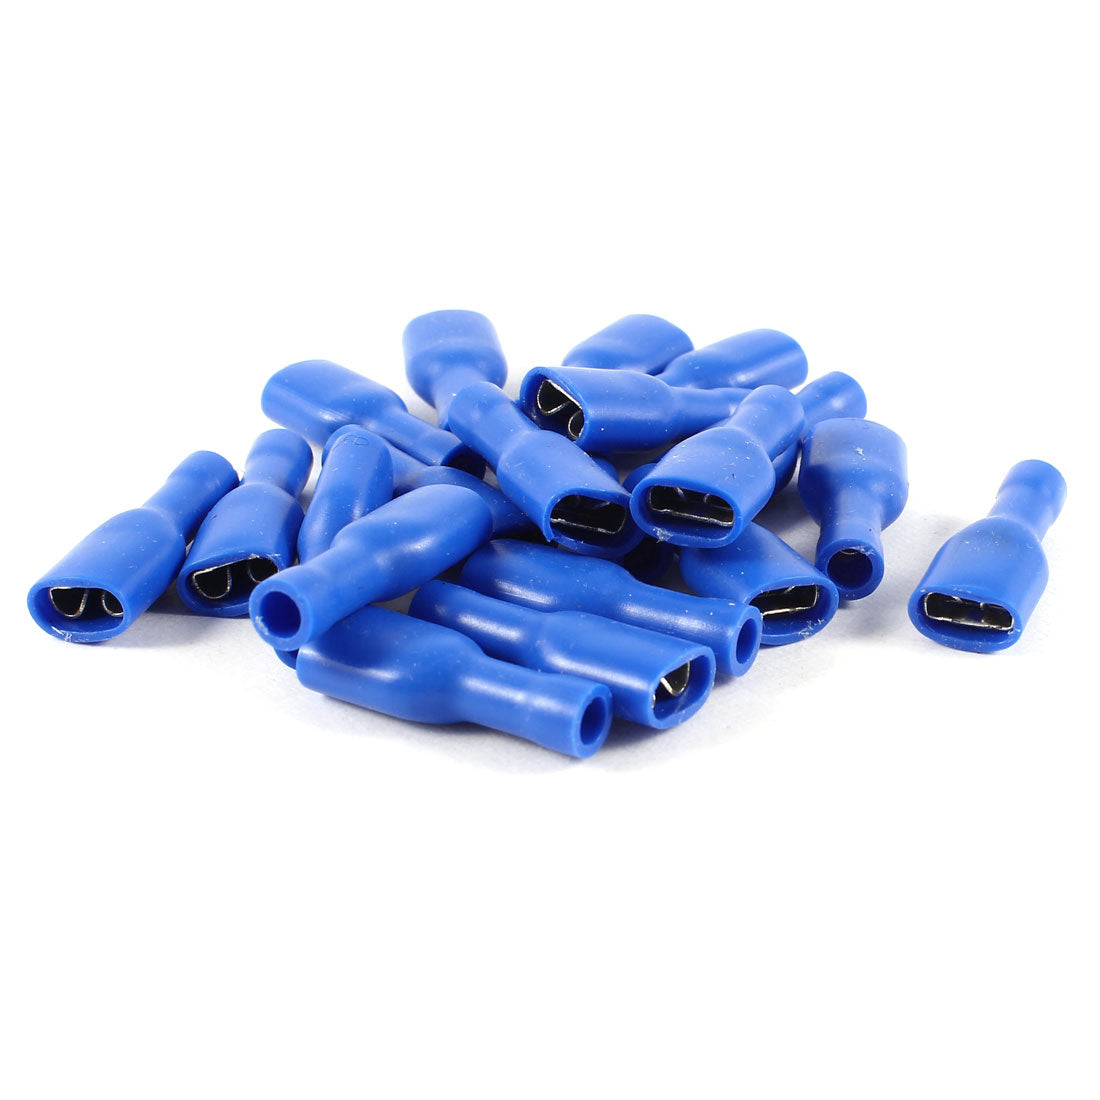 uxcell Uxcell 20 Pcs Blue Fully Insulated Female Spade Electrical Connector Crimp Terminals 6.3mm